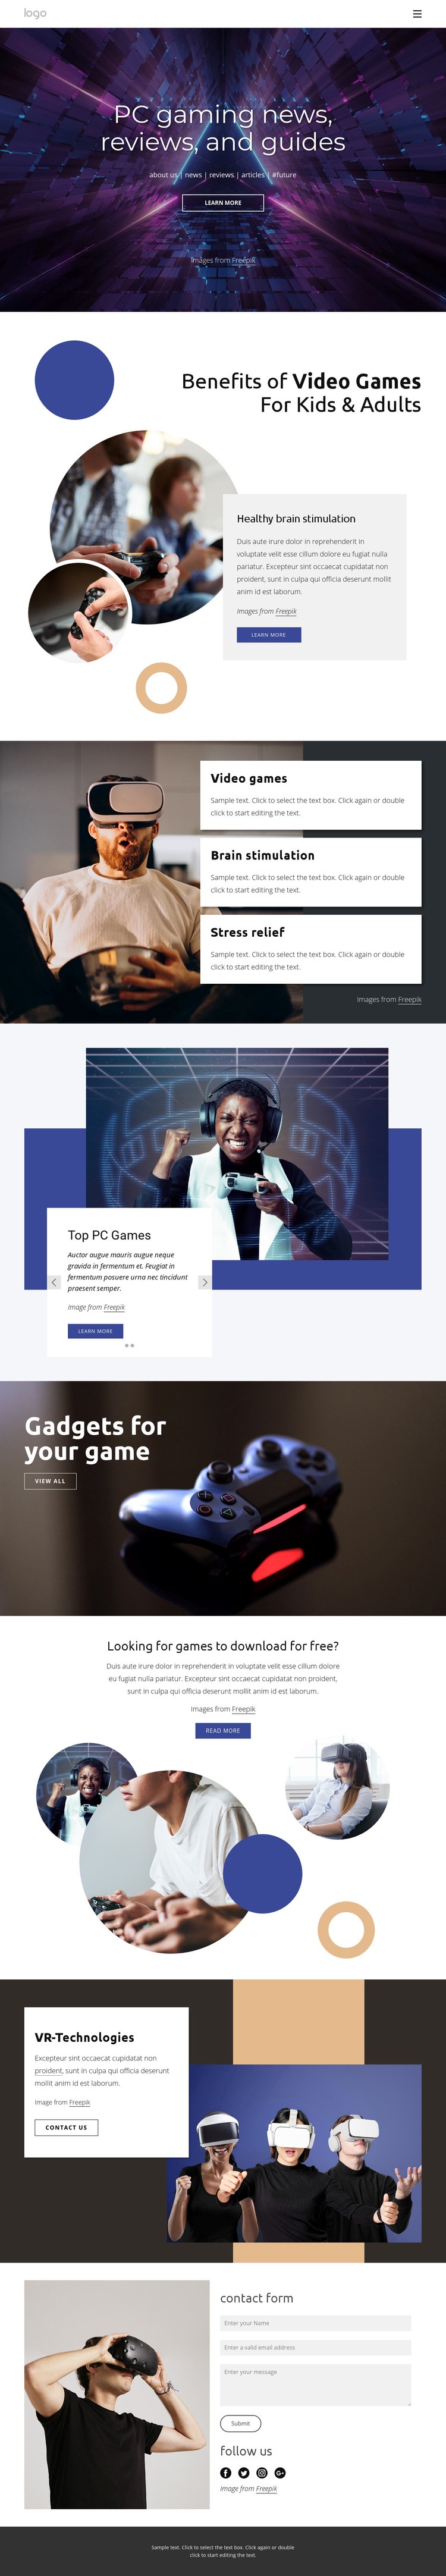 PC gaming news Web Page Design